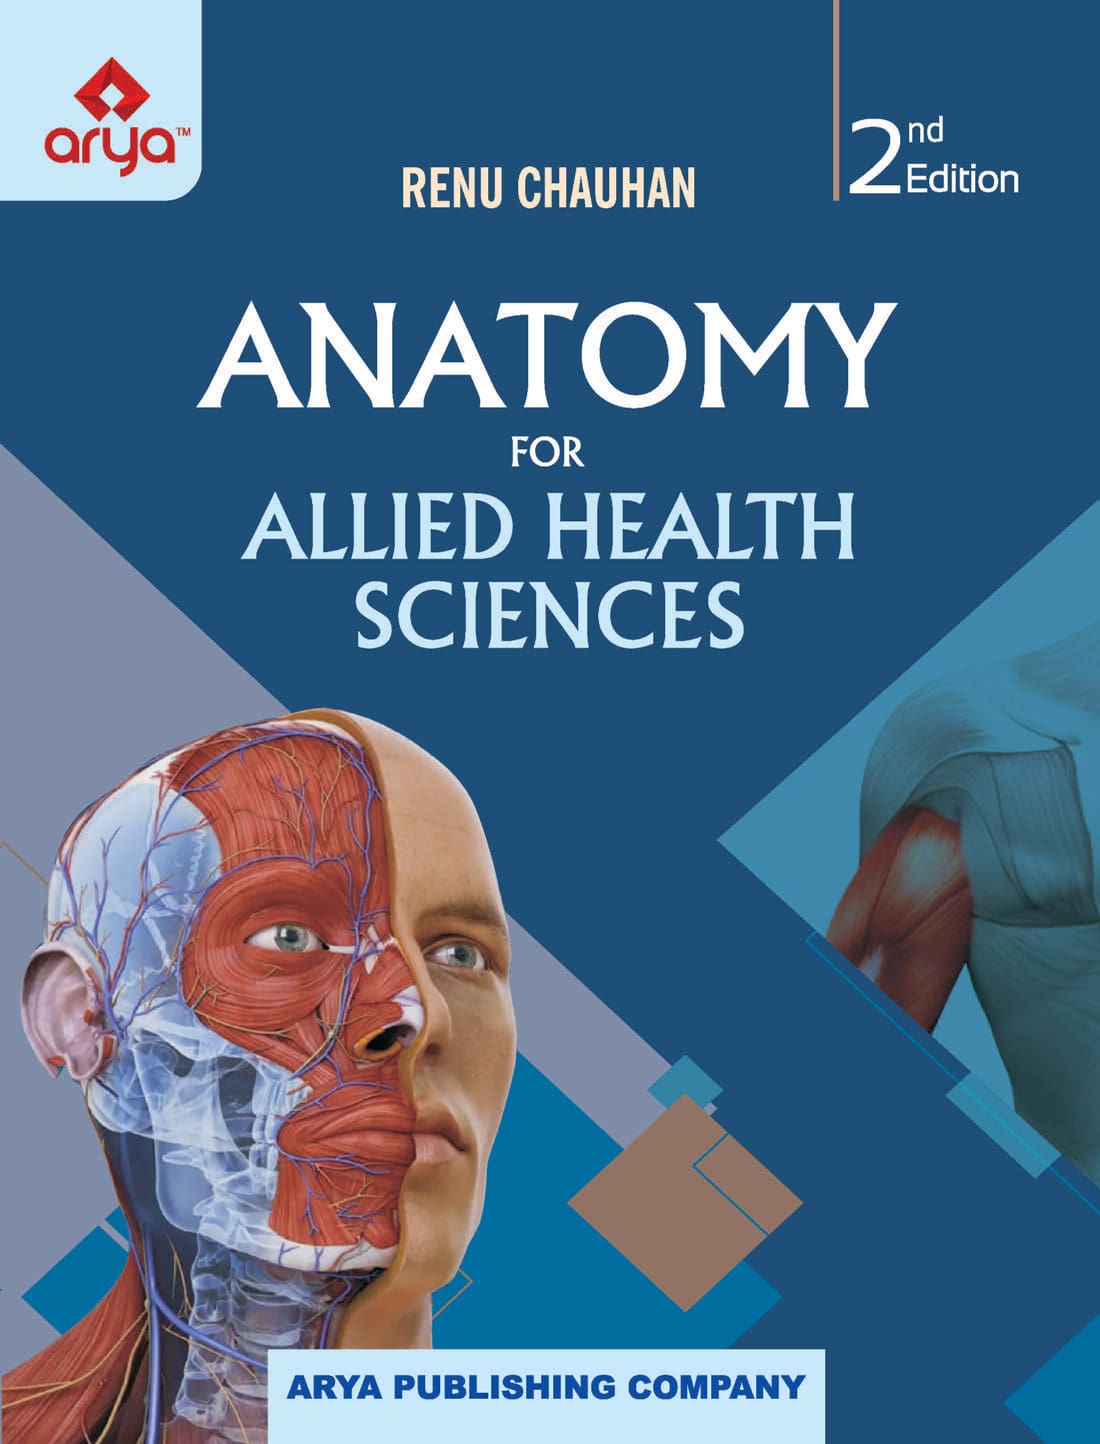 Anatomy for Allied Health Sciences